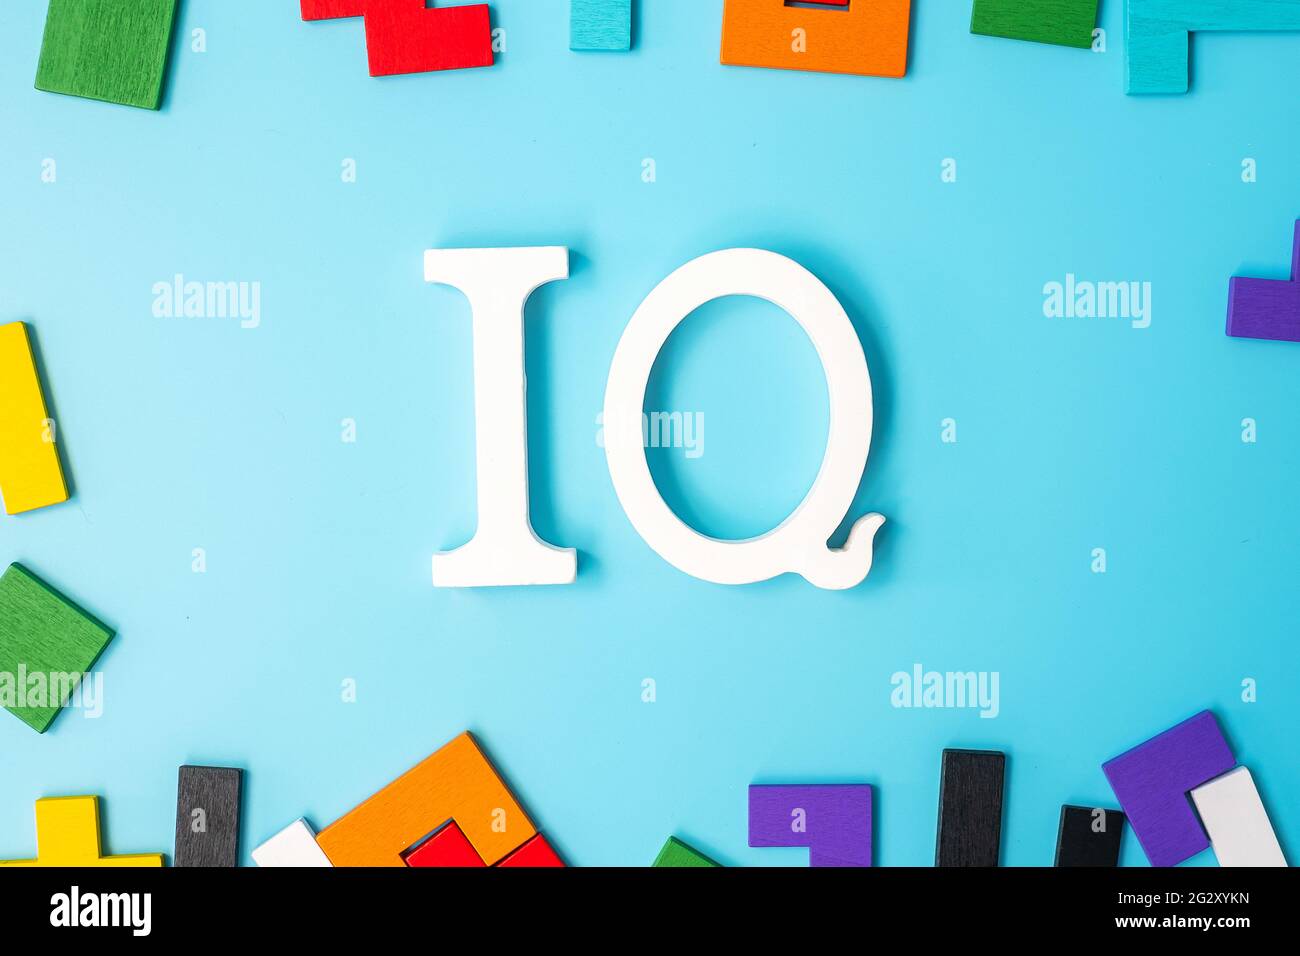 IQ text with colorful wood puzzle pieces, geometric shape block on blue background. Concept of intelligence quotient and logic thinking Stock Photo